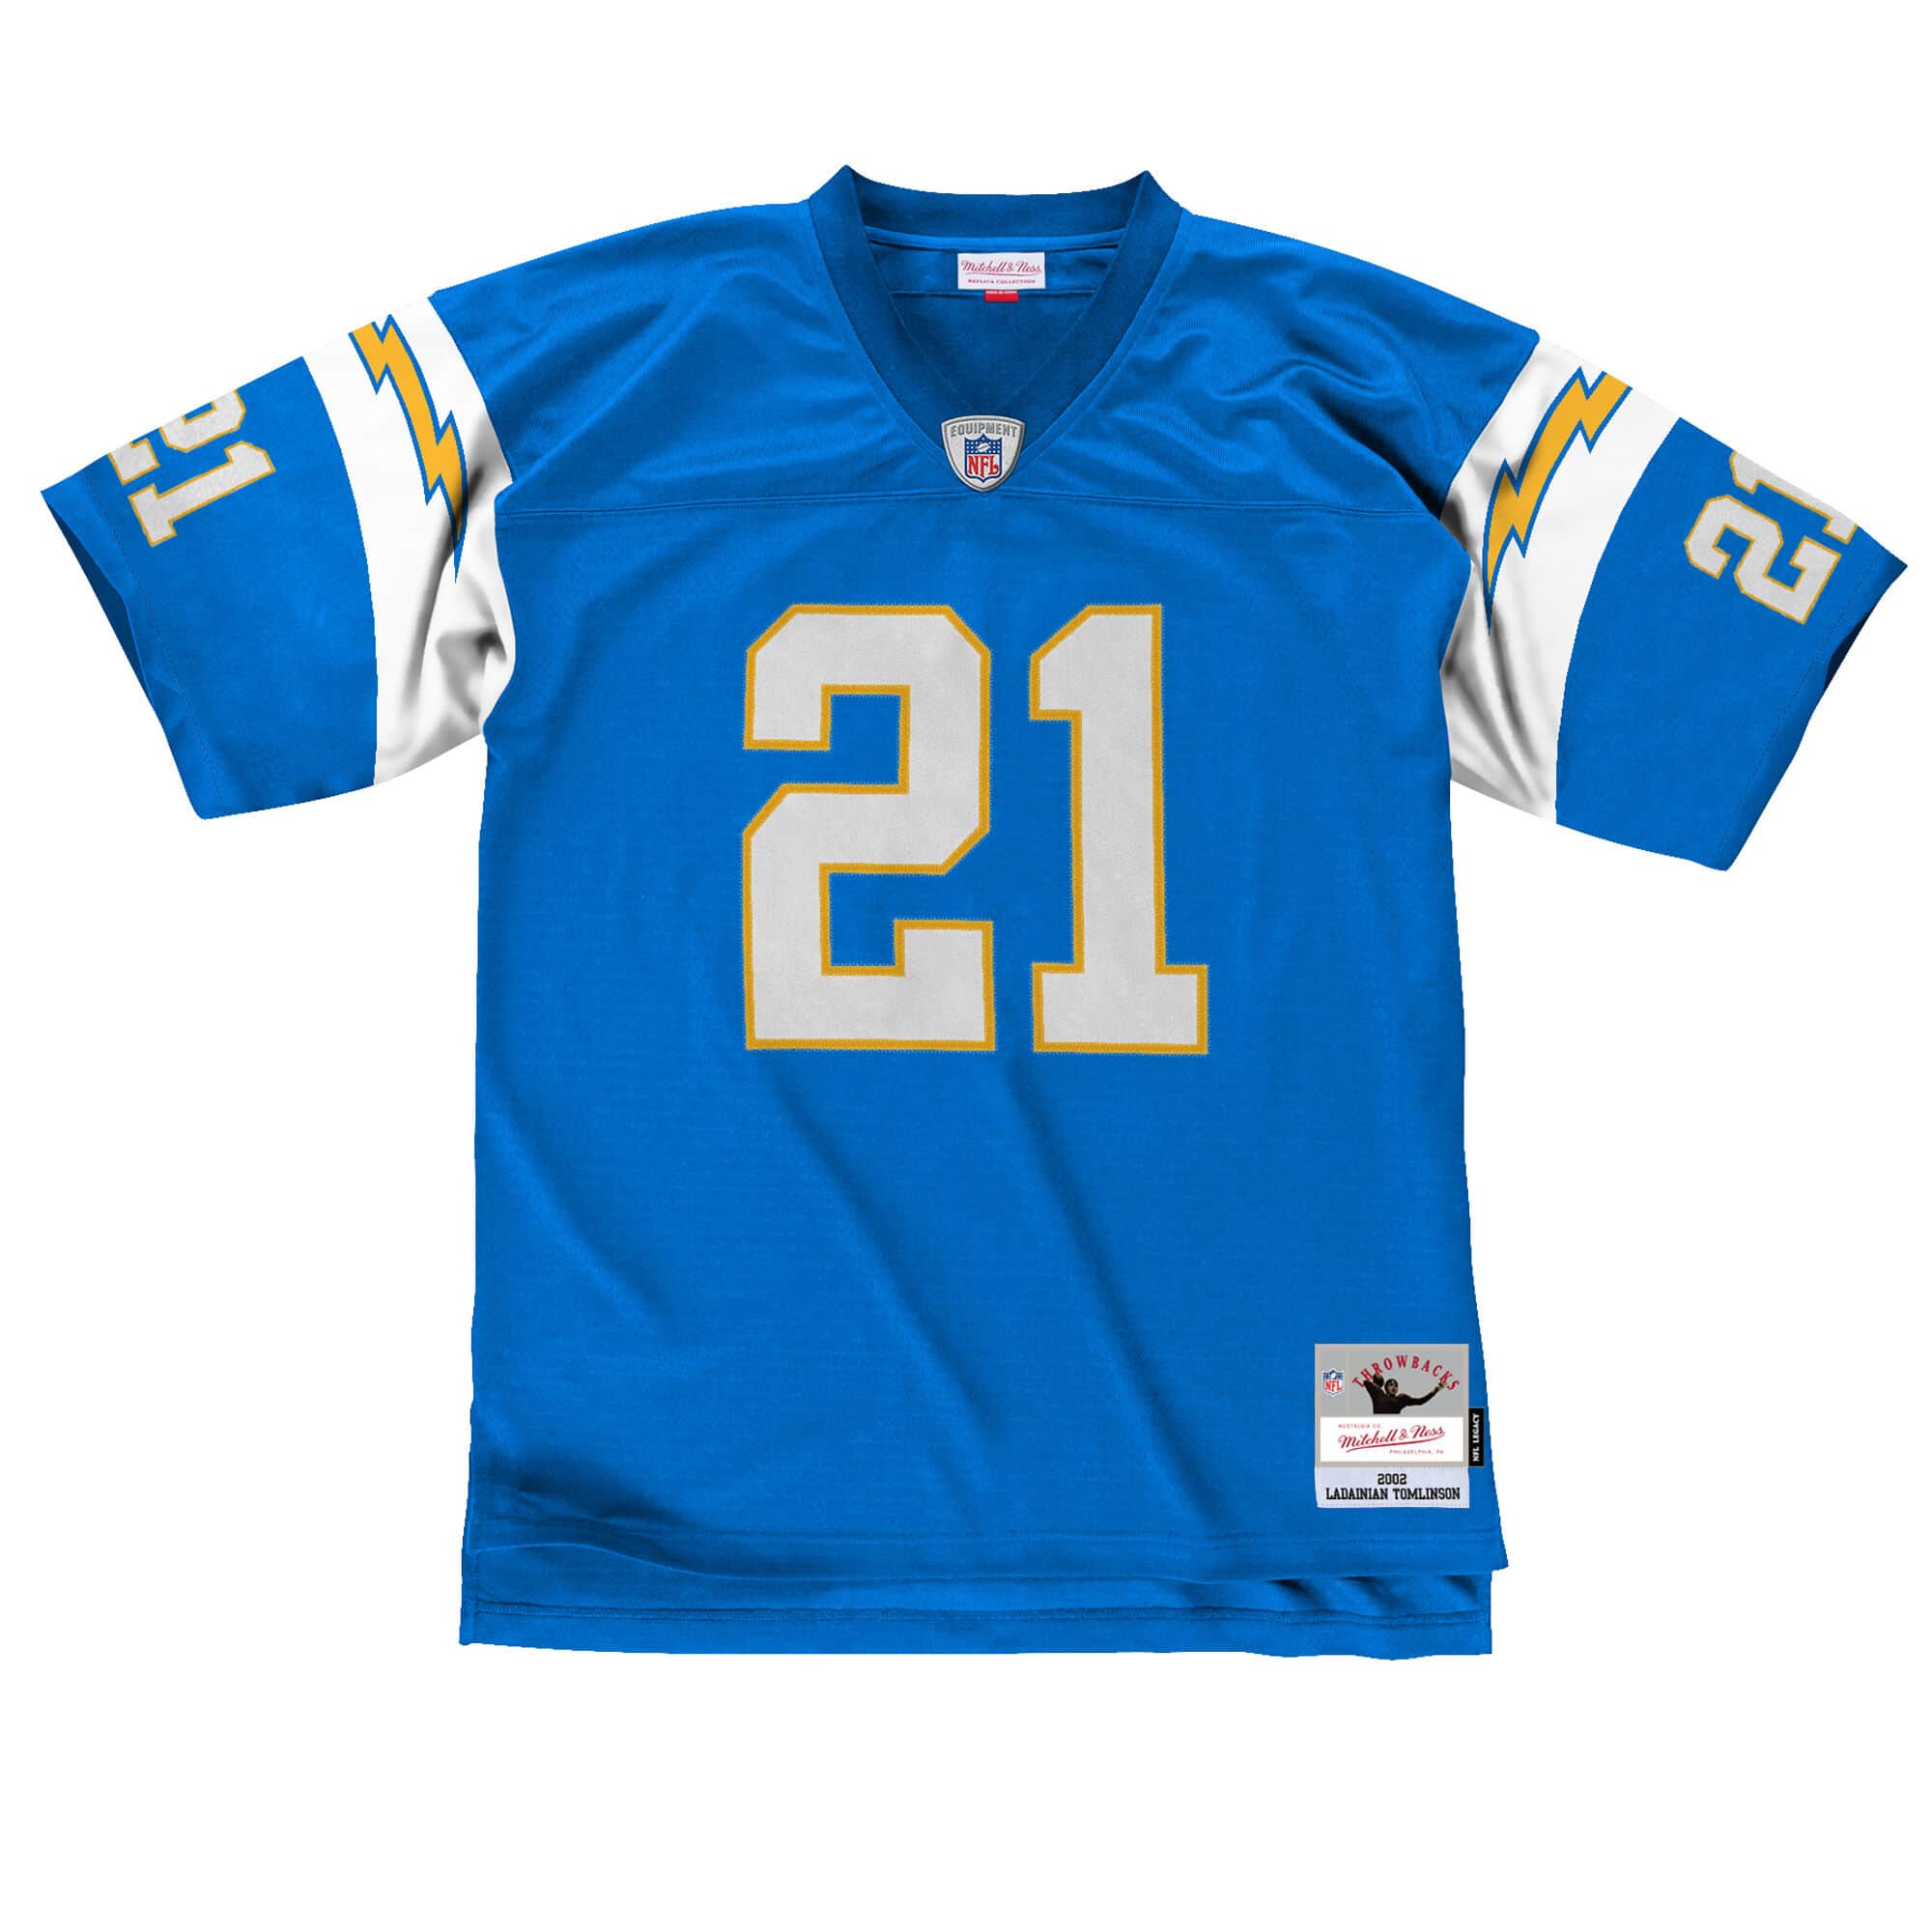 LaDainian Tomlinson San Diego Chargers Autographed Mitchell & Ness